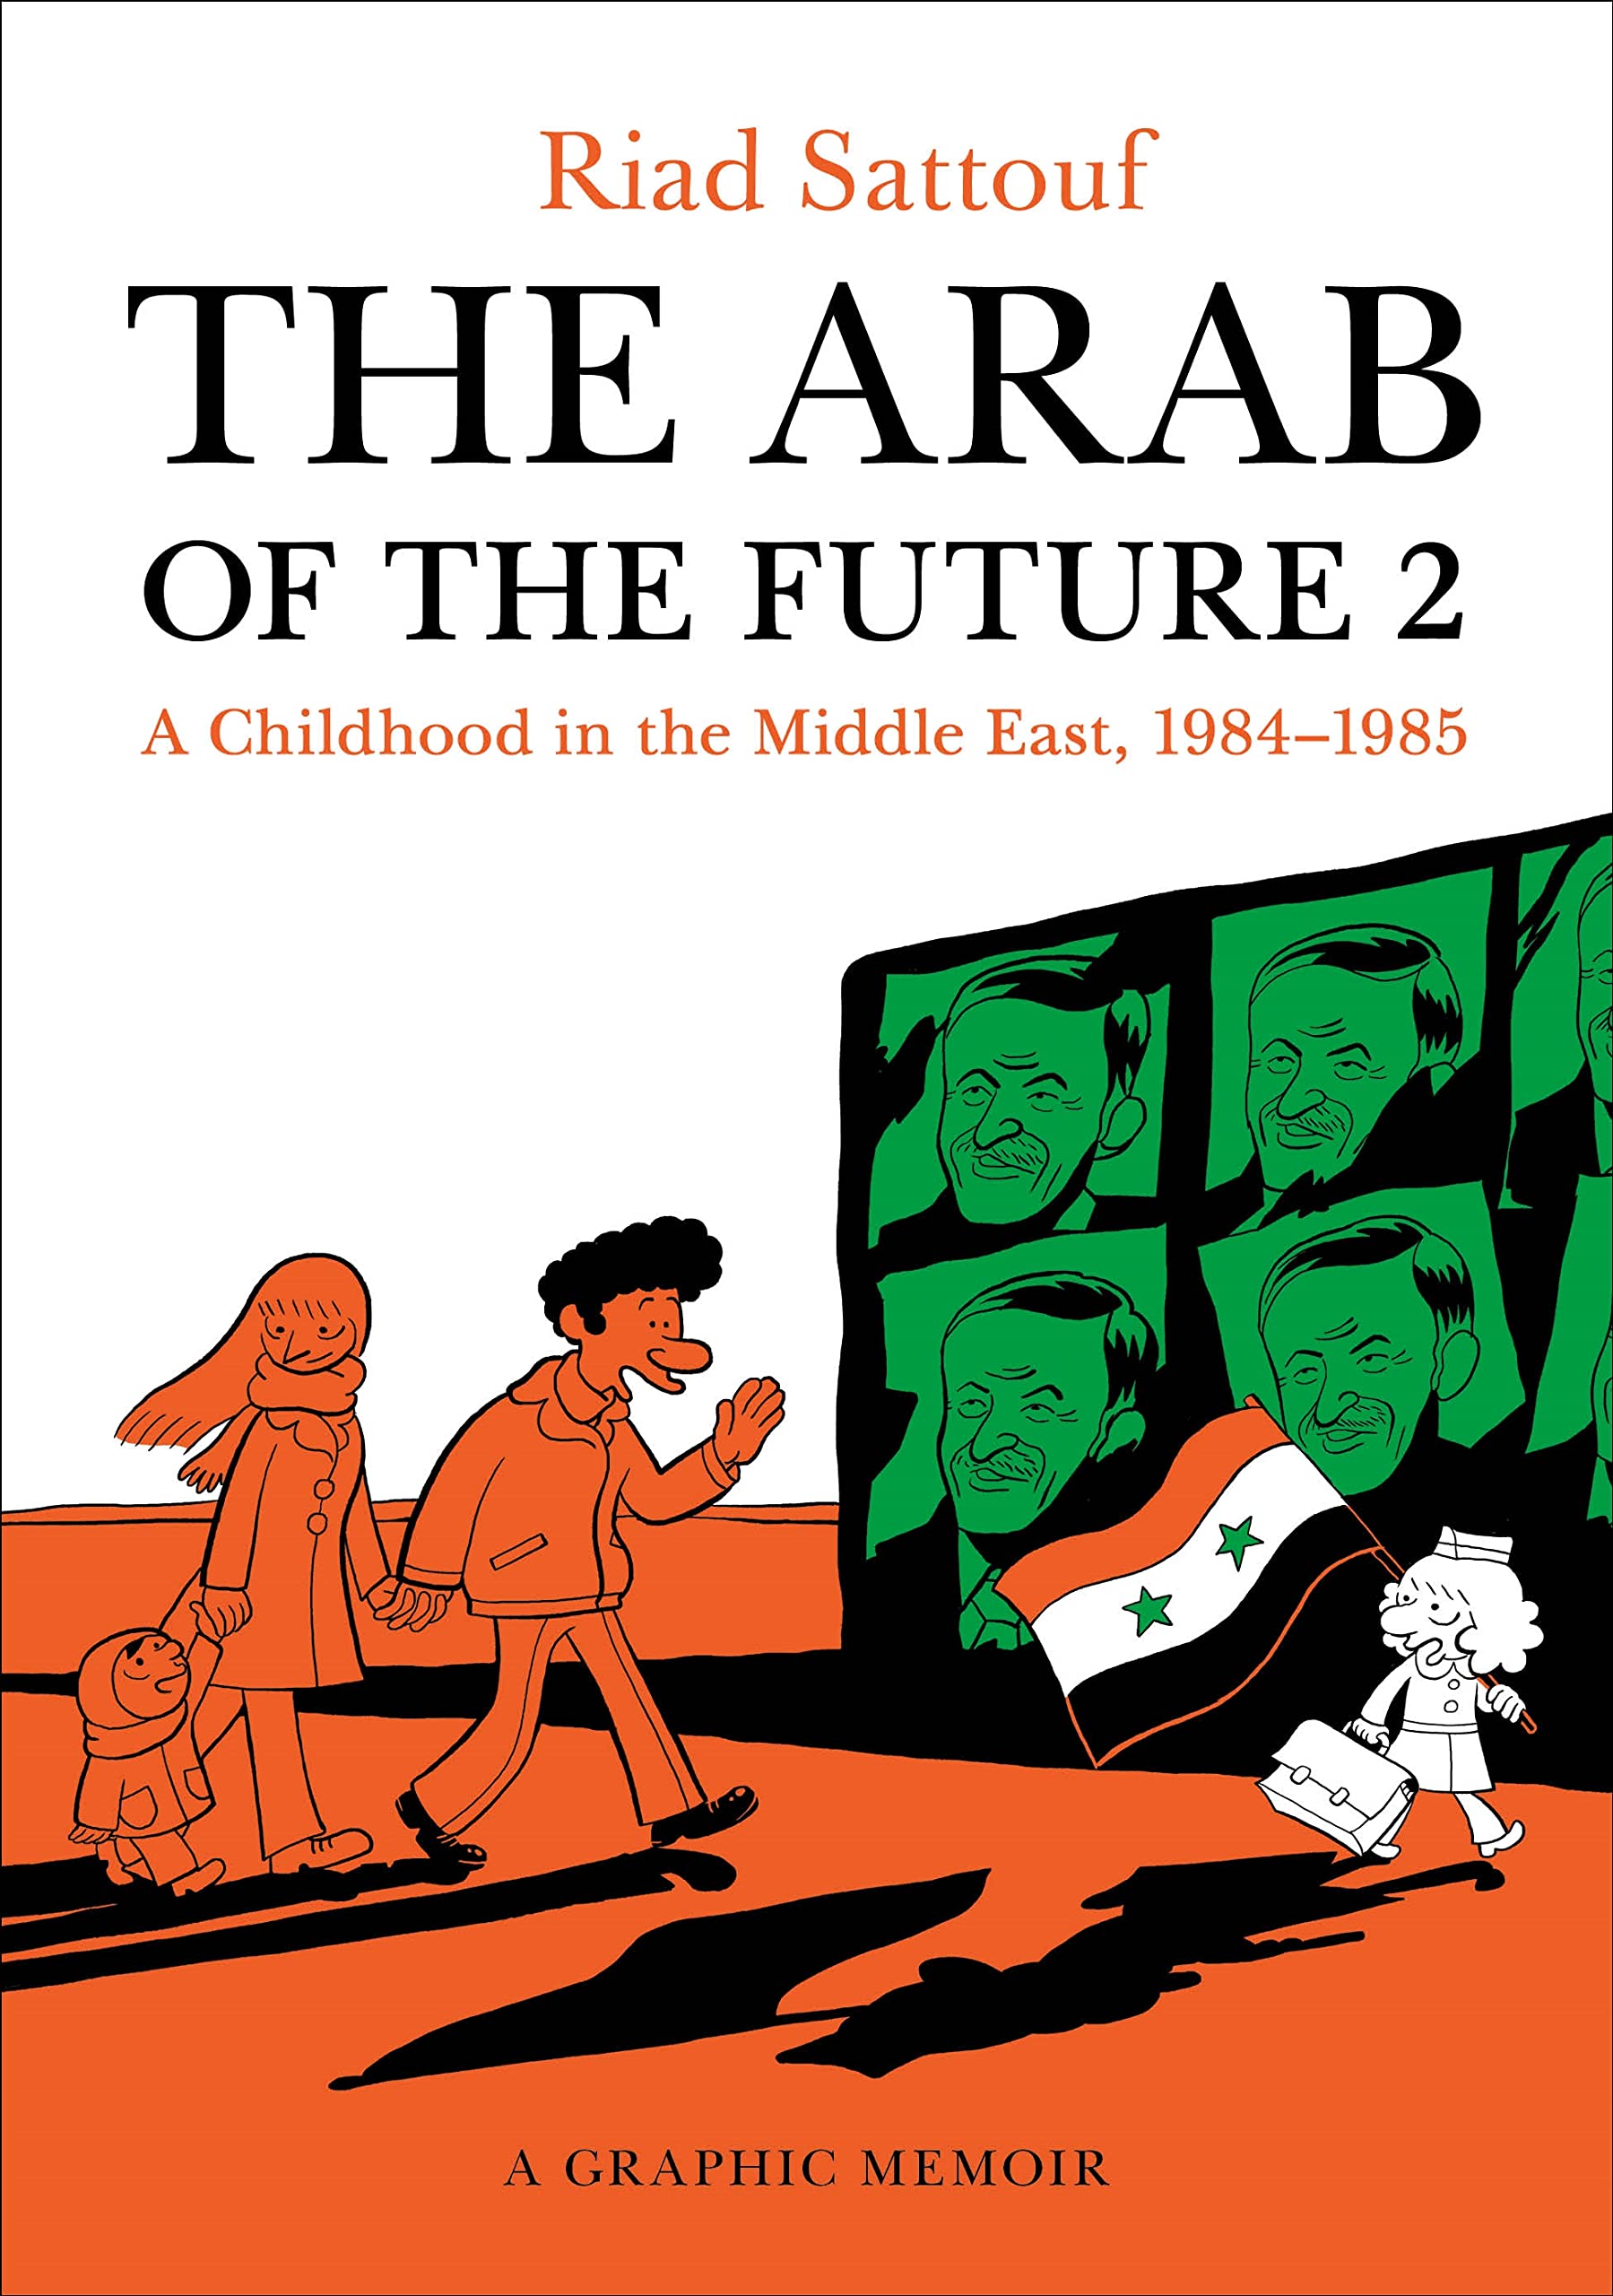 The Arab of the Future 2: A Childhood in the Middle East 1984-1985: A Graphic Memoir